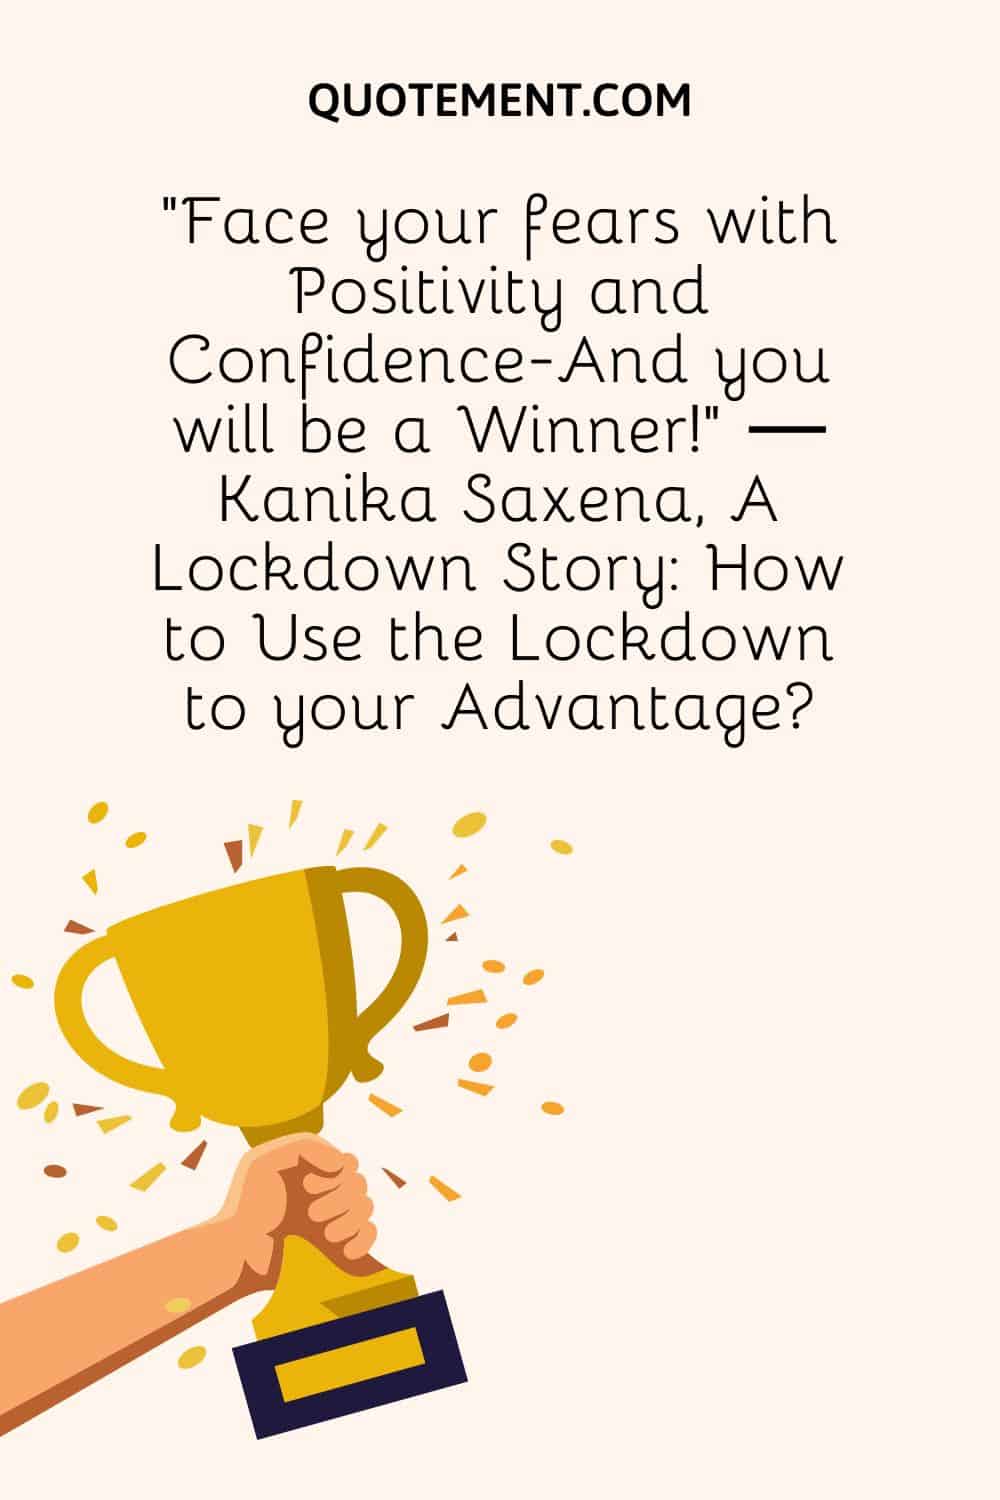 “Face your fears with Positivity and Confidence-And you will be a Winner!” ― Kanika Saxena, A Lockdown Story How to Use the Lockdown to your Advantage